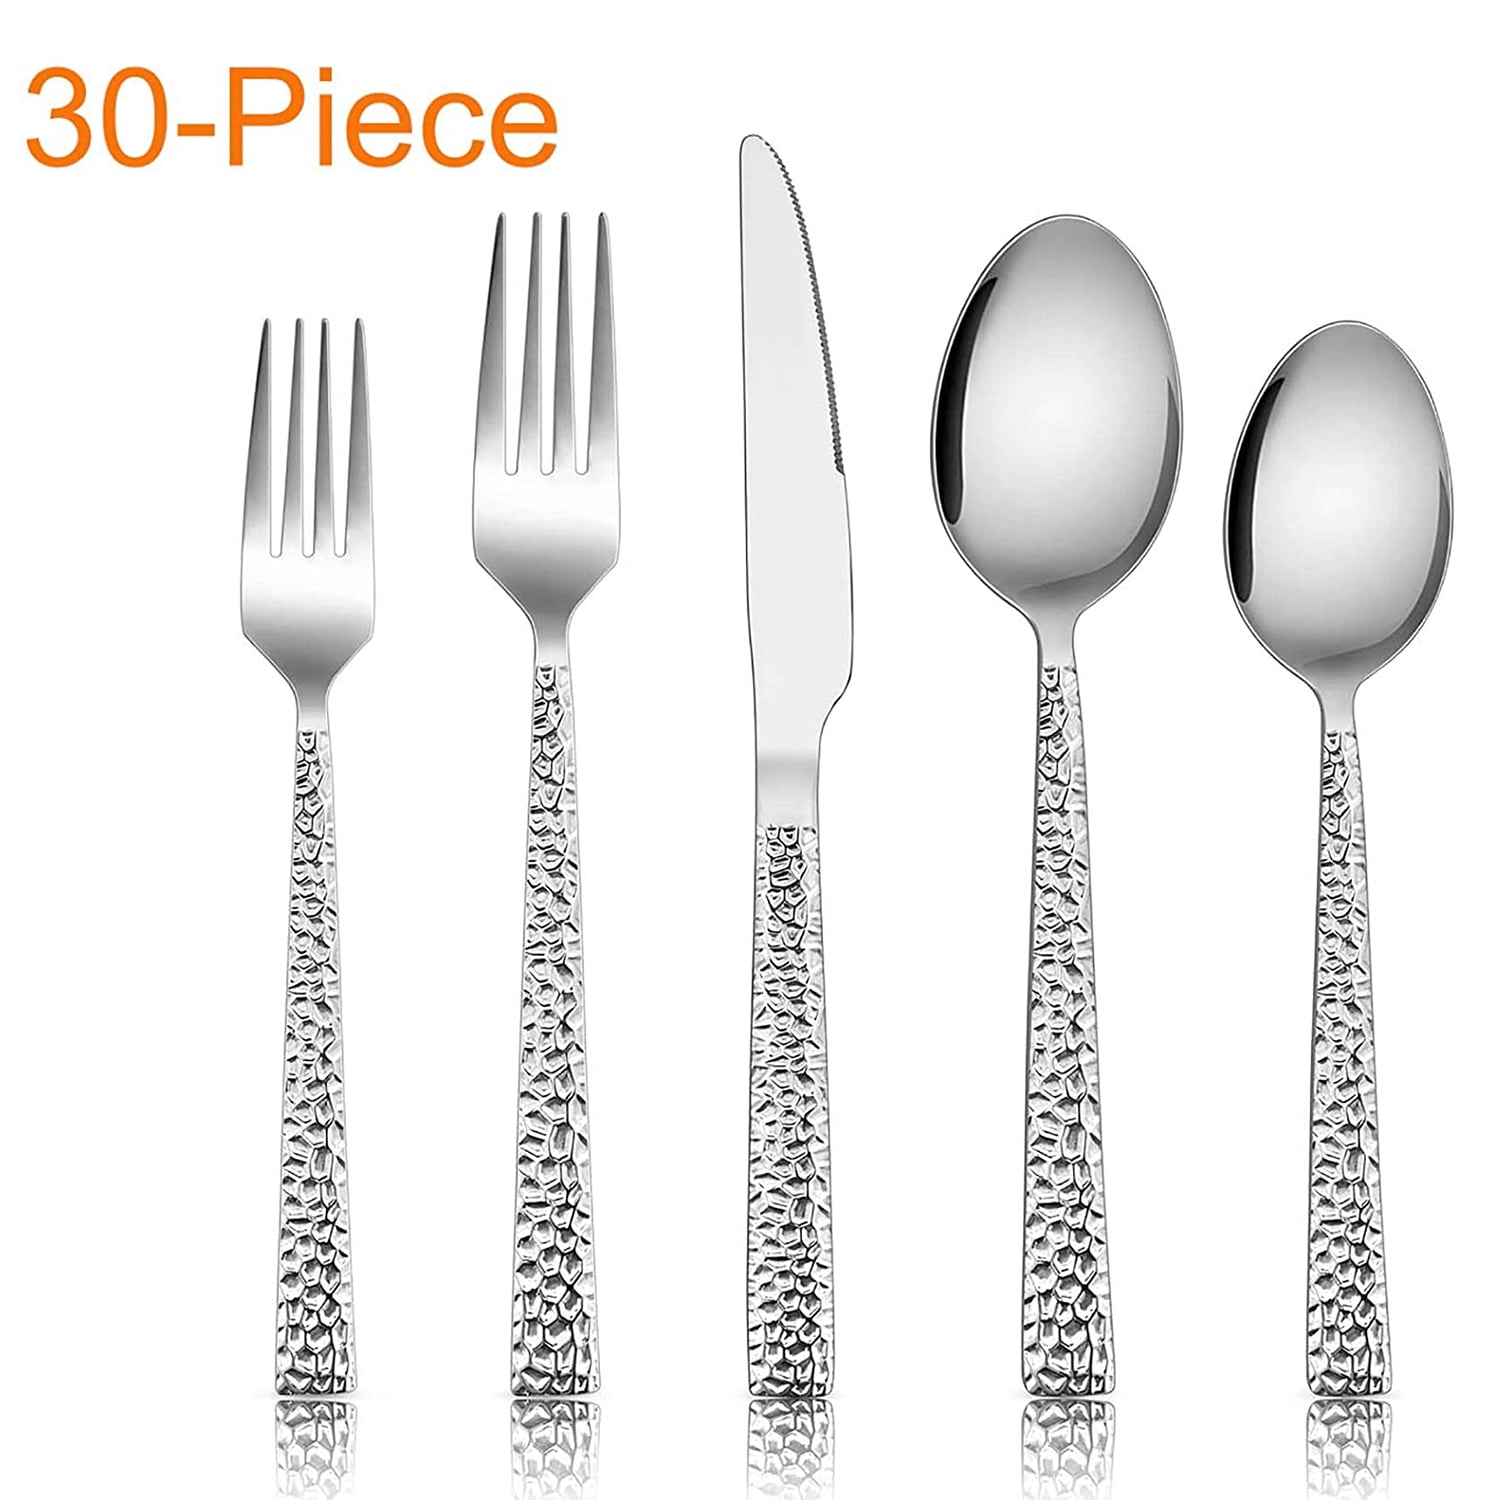 Heavy Duty Silverware Set for 8, E-far 40-Piece Stainless Steel Flatware  Cutlery Set, Heavy Weight Metal Eating Utensils Sets for Home Restaurant